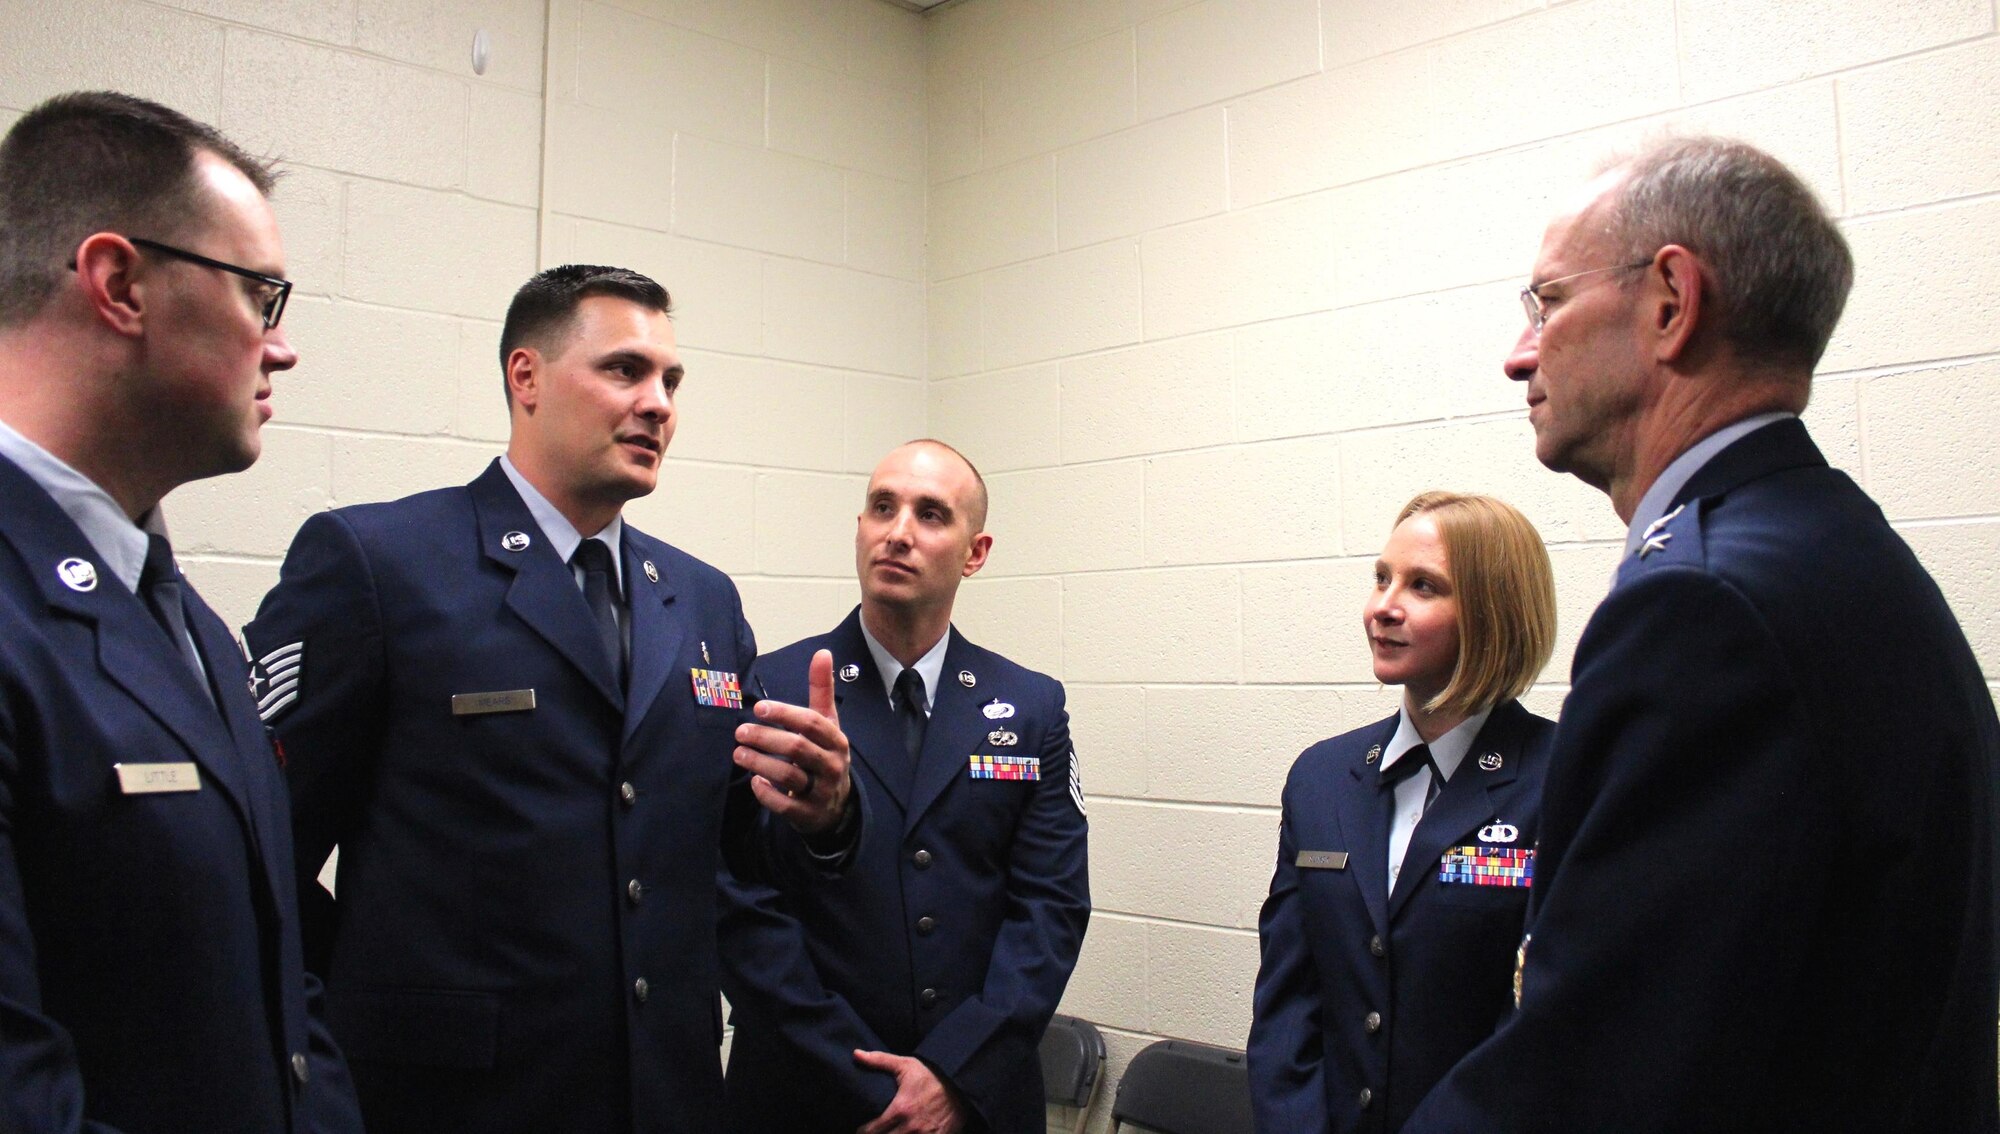 Air Force Surgeon General Lt. Gen. (Dr.) Mark Ediger met with Air Force Students prior to the commencement ceremony. The charter class of the Enlisted to Medical Degree Preparatory Program graduated on May 11, 2016 during a commencement ceremony held at George Mason University. The Enlisted to Medical Degree Preparatory Program is a partnership between the Armed Services and Uniformed Services University. Designed for enlisted service members, the two-year program enables members to remain on active duty status while enrolled as full-time students in preparation for application to medical school. Pictured from left to right: Staff Sgt. Matt Little, Tech. Sgt. Jeremy Mears, Tech. Sgt. Joe Merfeld, Tech. Sgt. Lindsay Slimski and Gen. Ediger (U.S. Air Force photo by Prerana Korpe, AFMS Public Affairs)